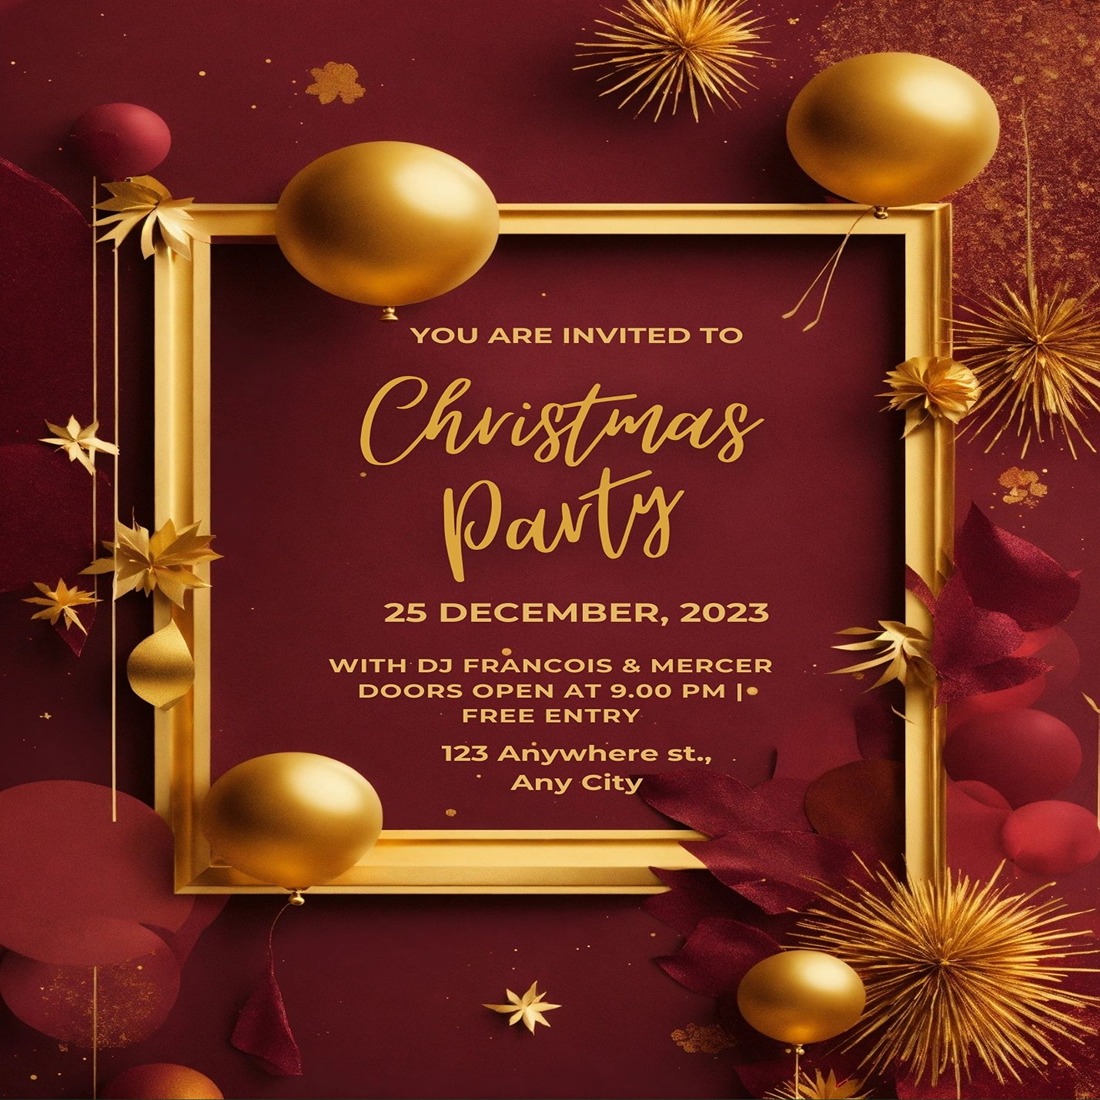 Merry Christmas - Party Invention Card Design Template Total - 08 preview image.